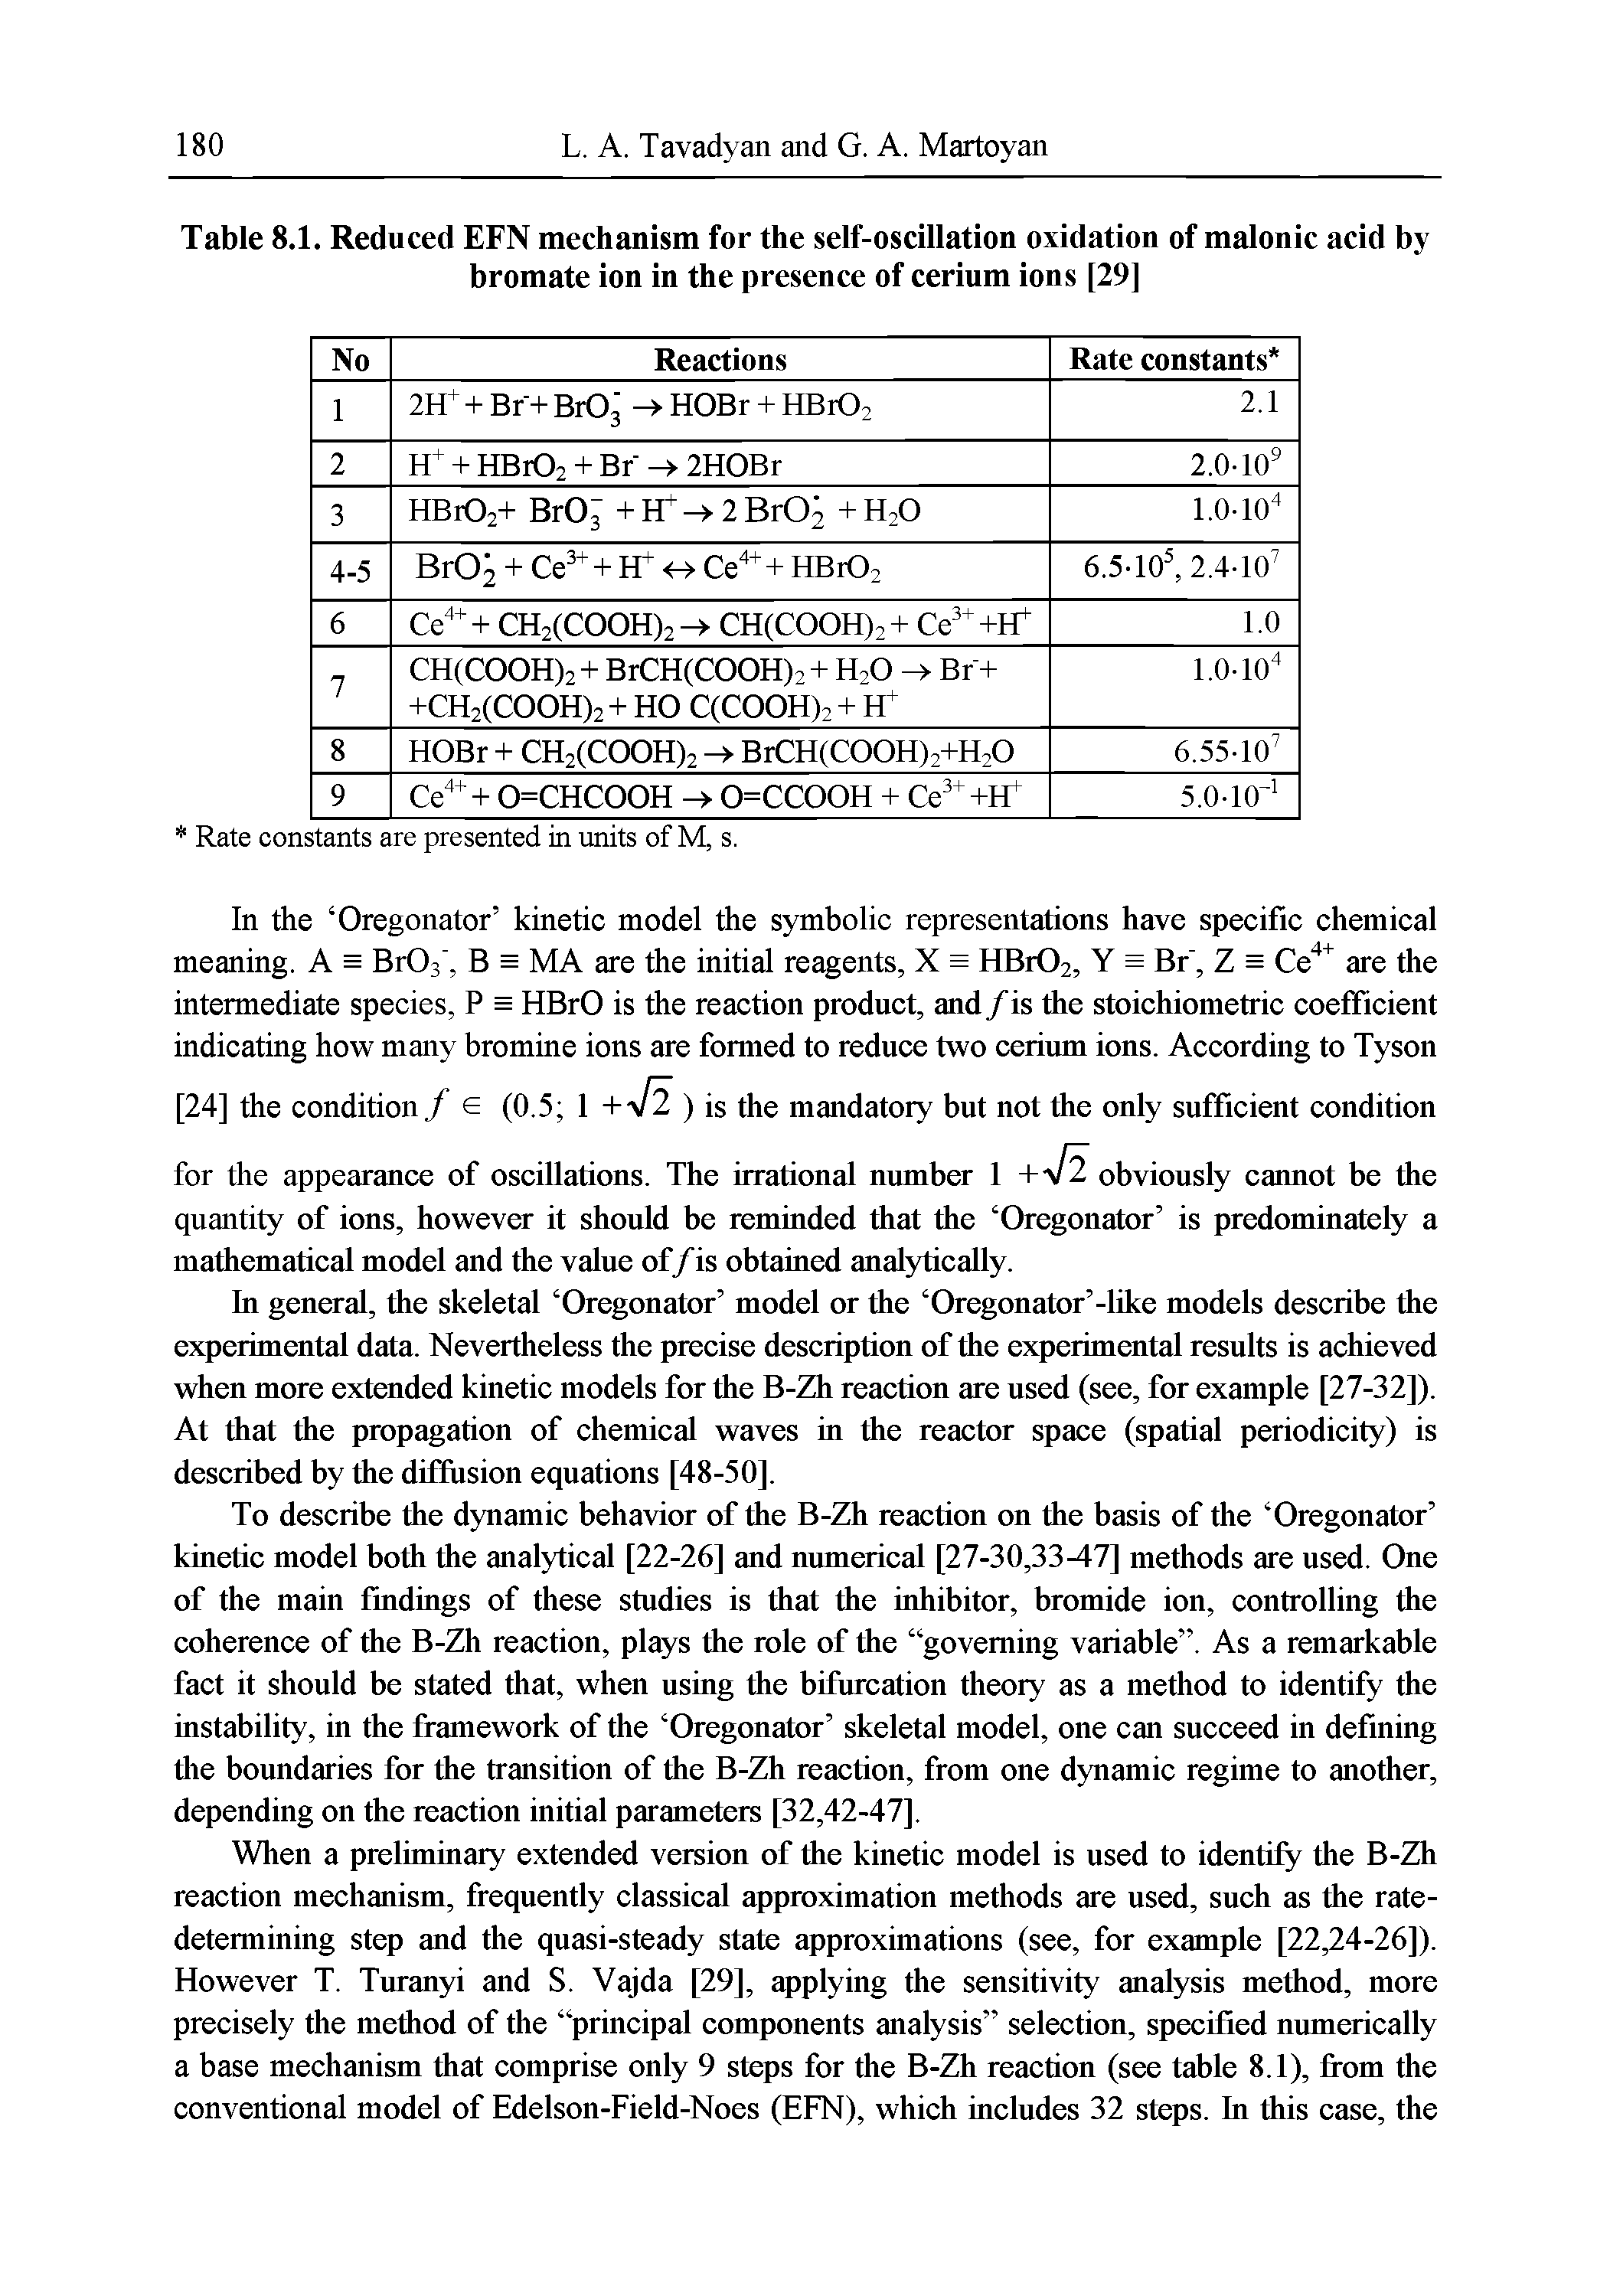 Table 8.1. Reduced EFN mechanism for the self-oscillation oxidation of malonic acid by bromate ion in the presence of cerium ions [29]...